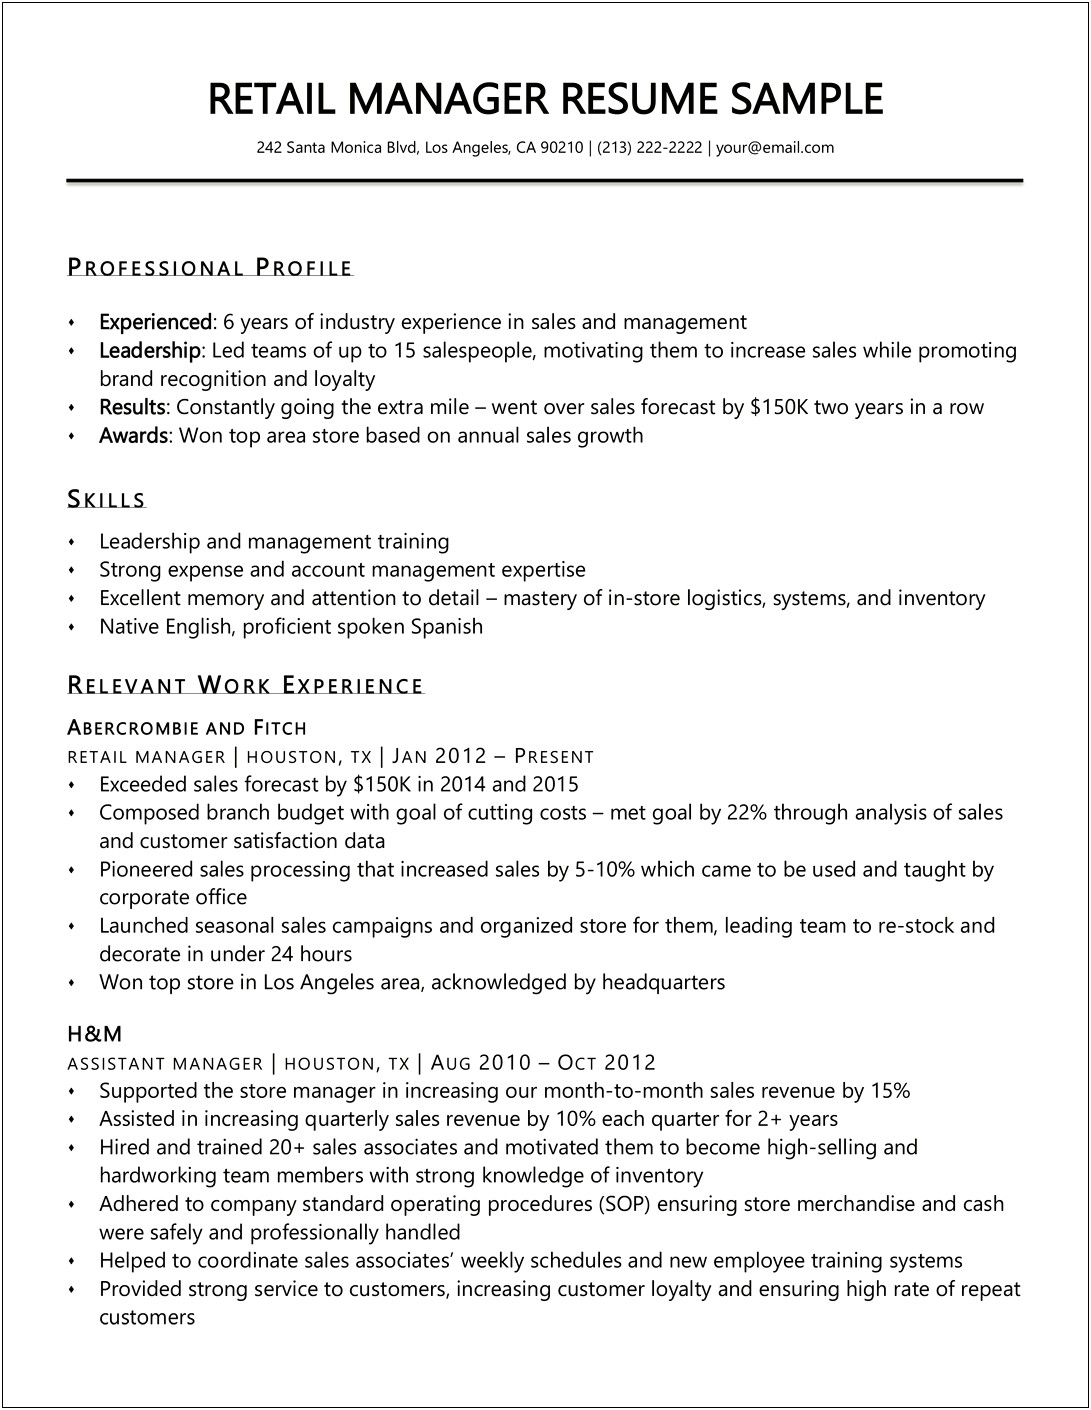 Professional Resume Summary For Retail Manager